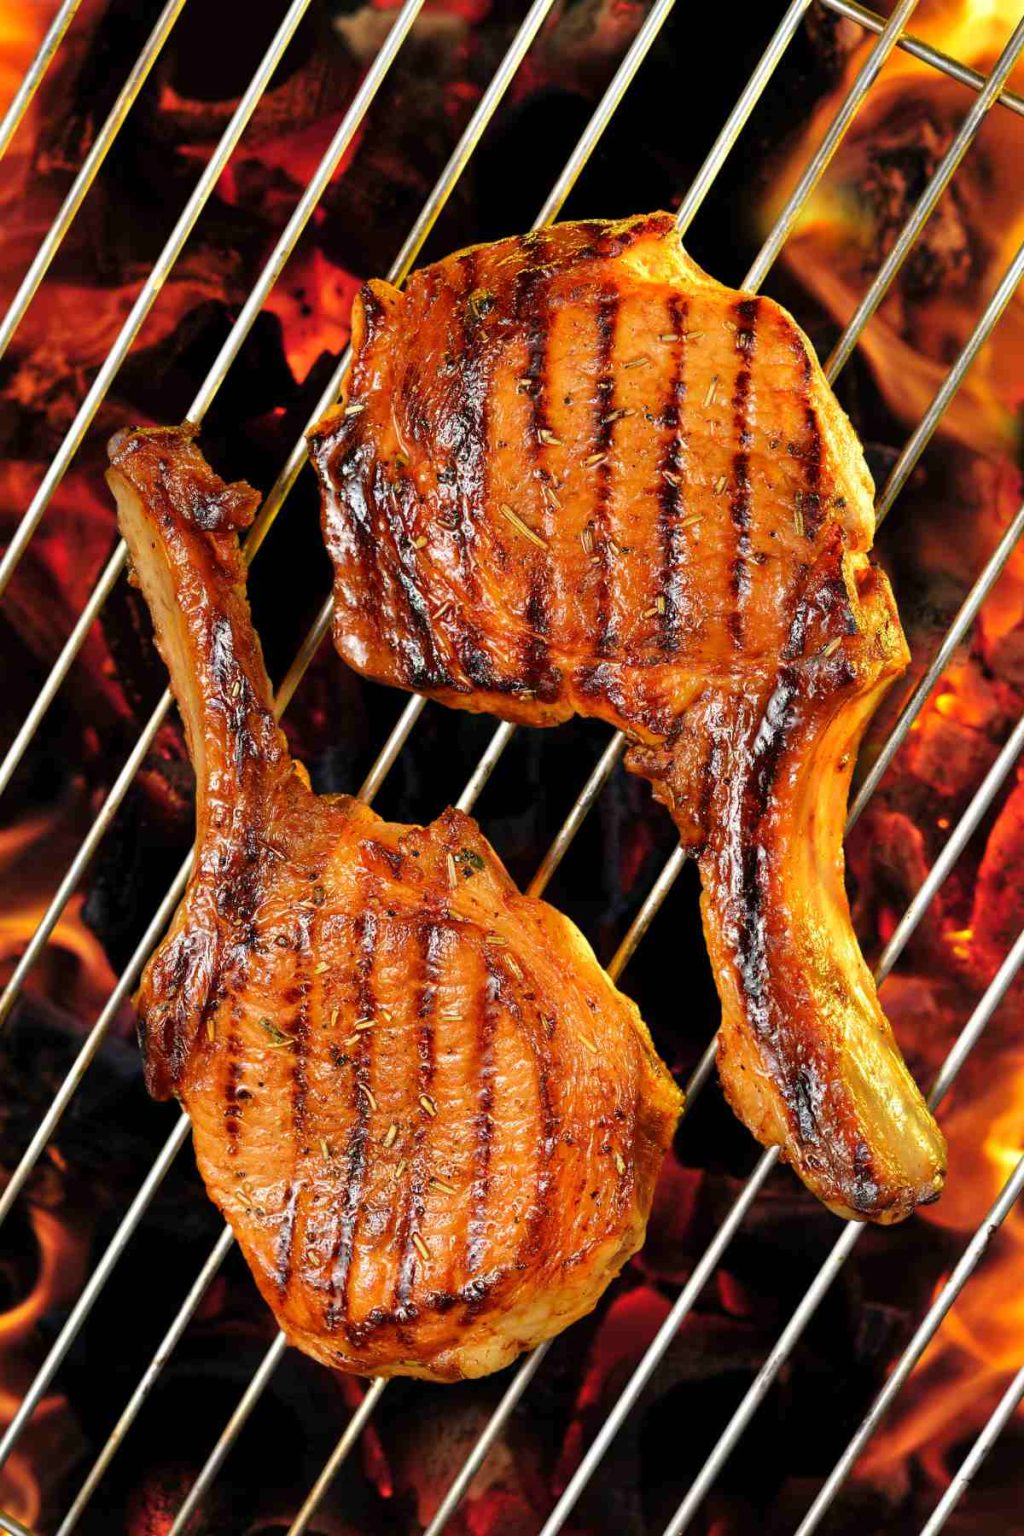 Pork Chop Grill Temp (What Temperature to Grill Pork Chops) - IzzyCooking